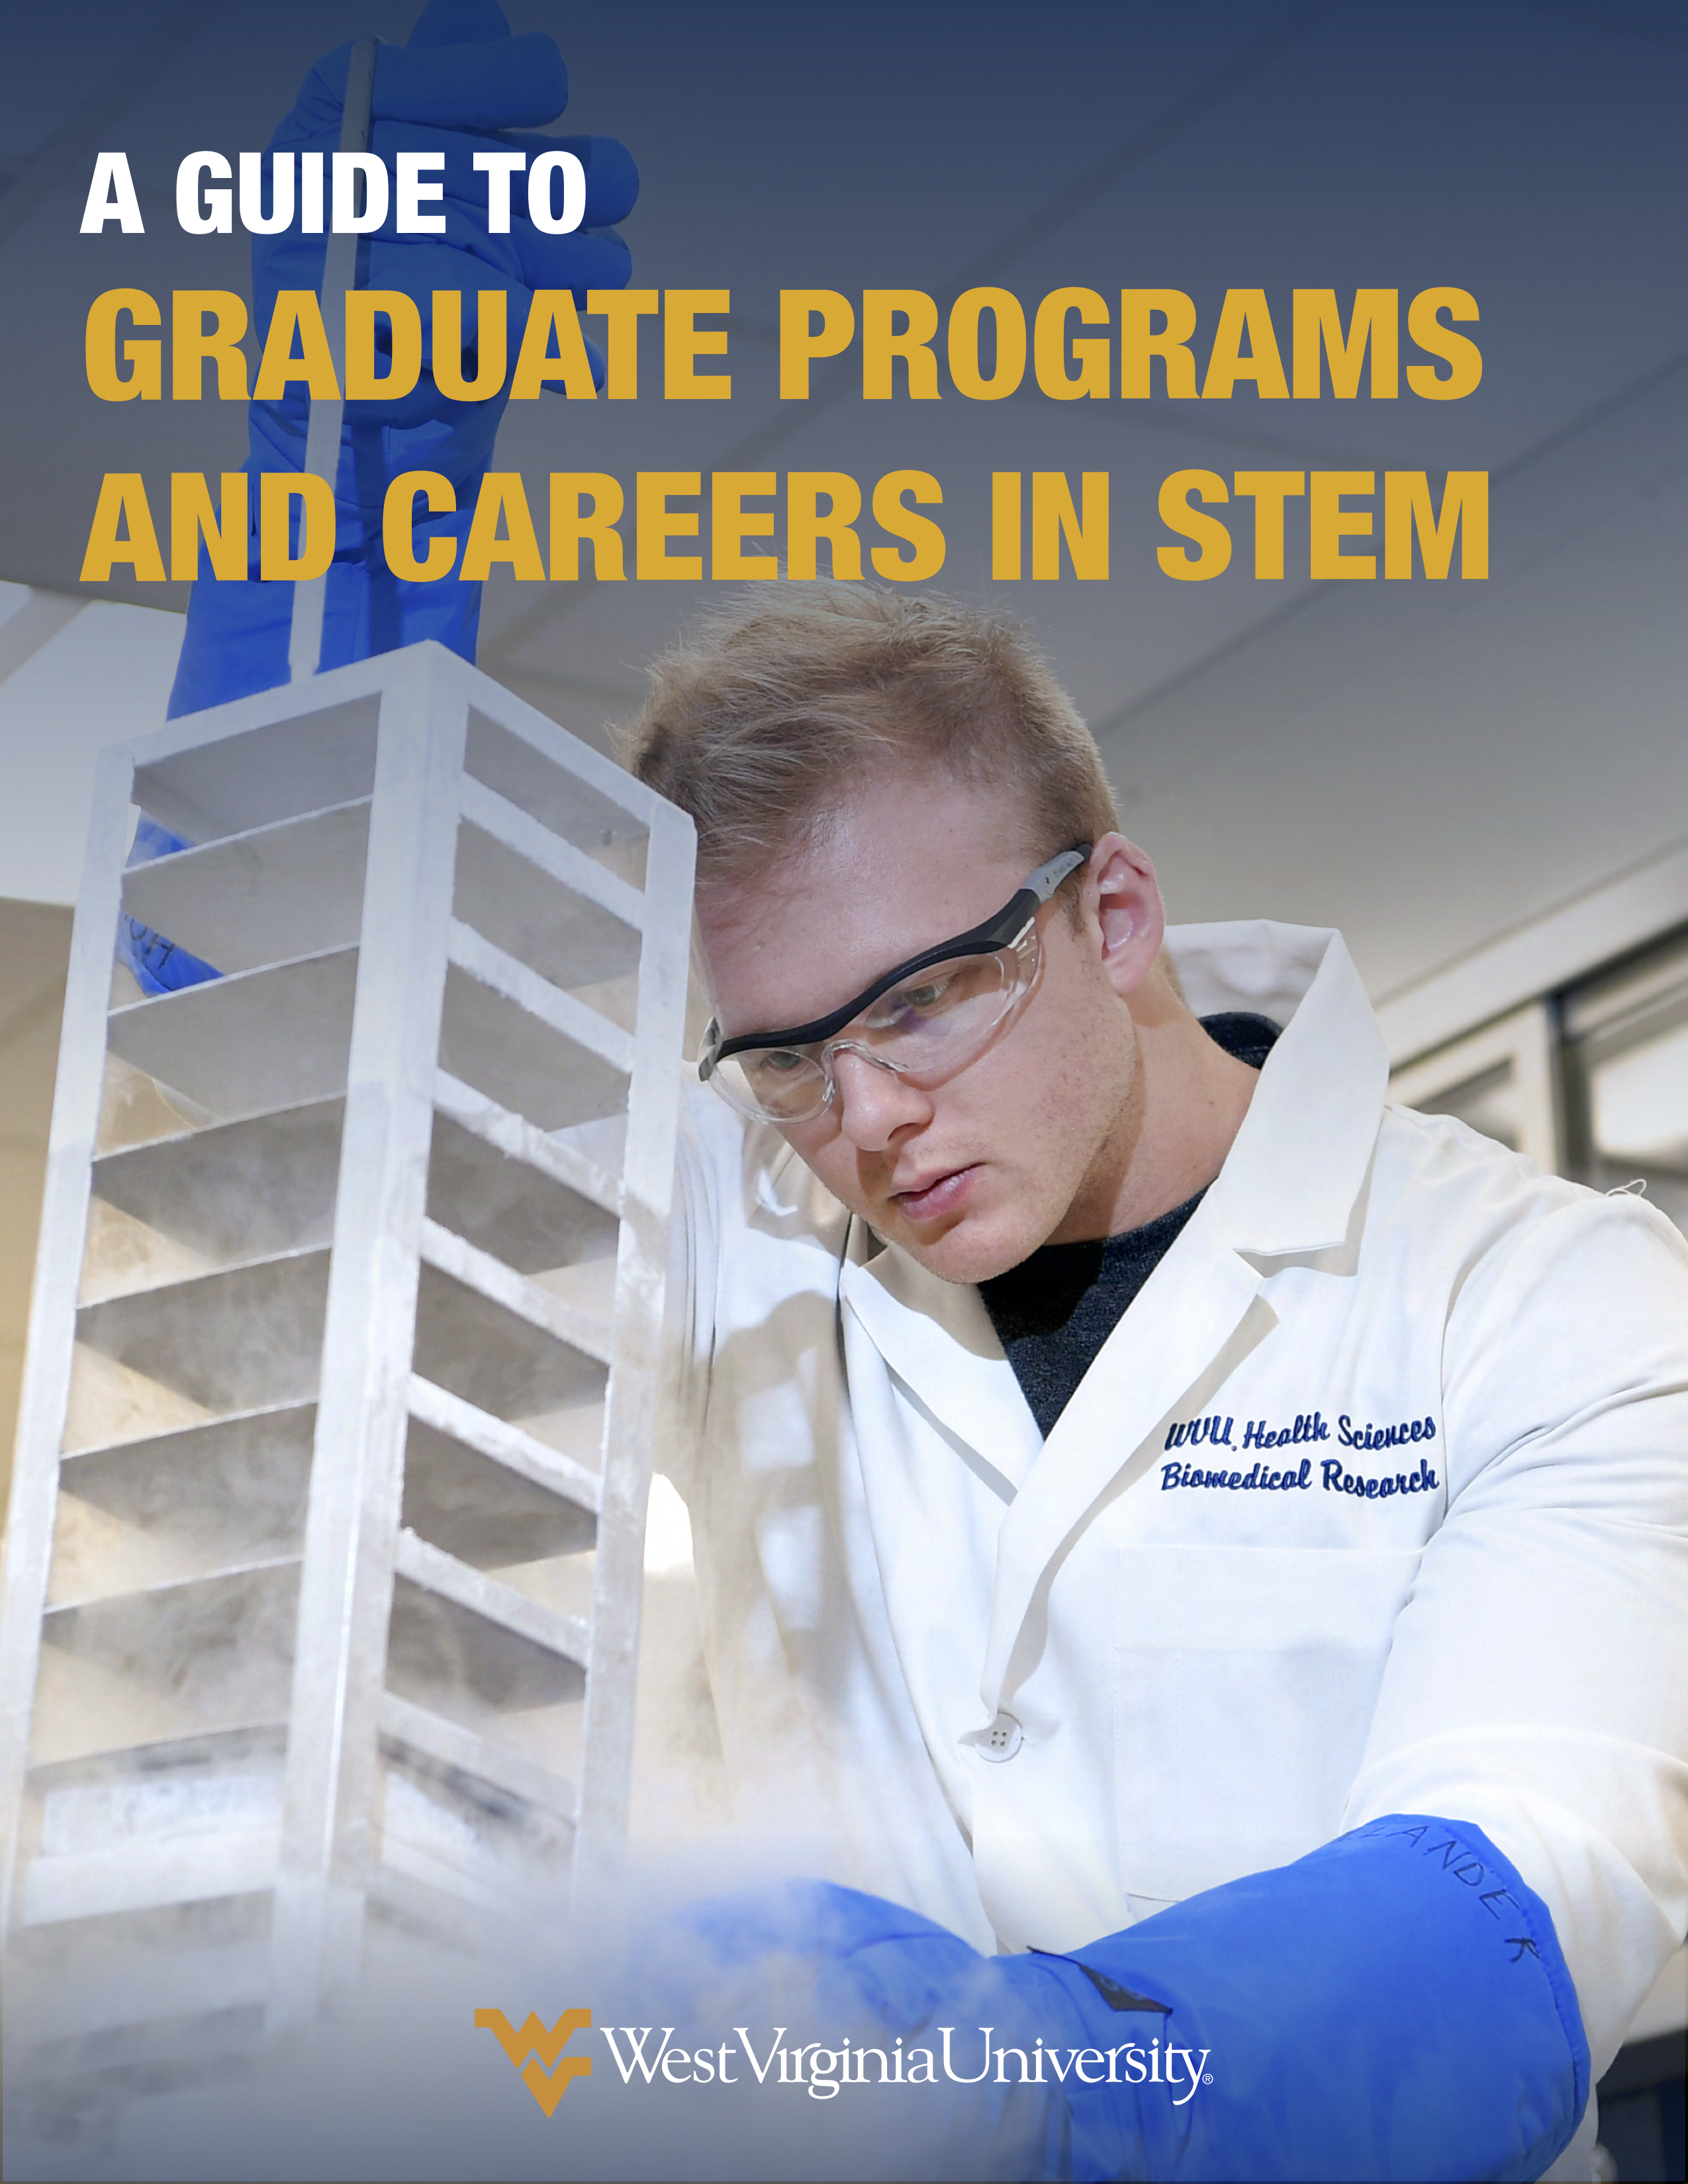 A Guide to Graduate Programs and Careers in STEM-thumbnail.png